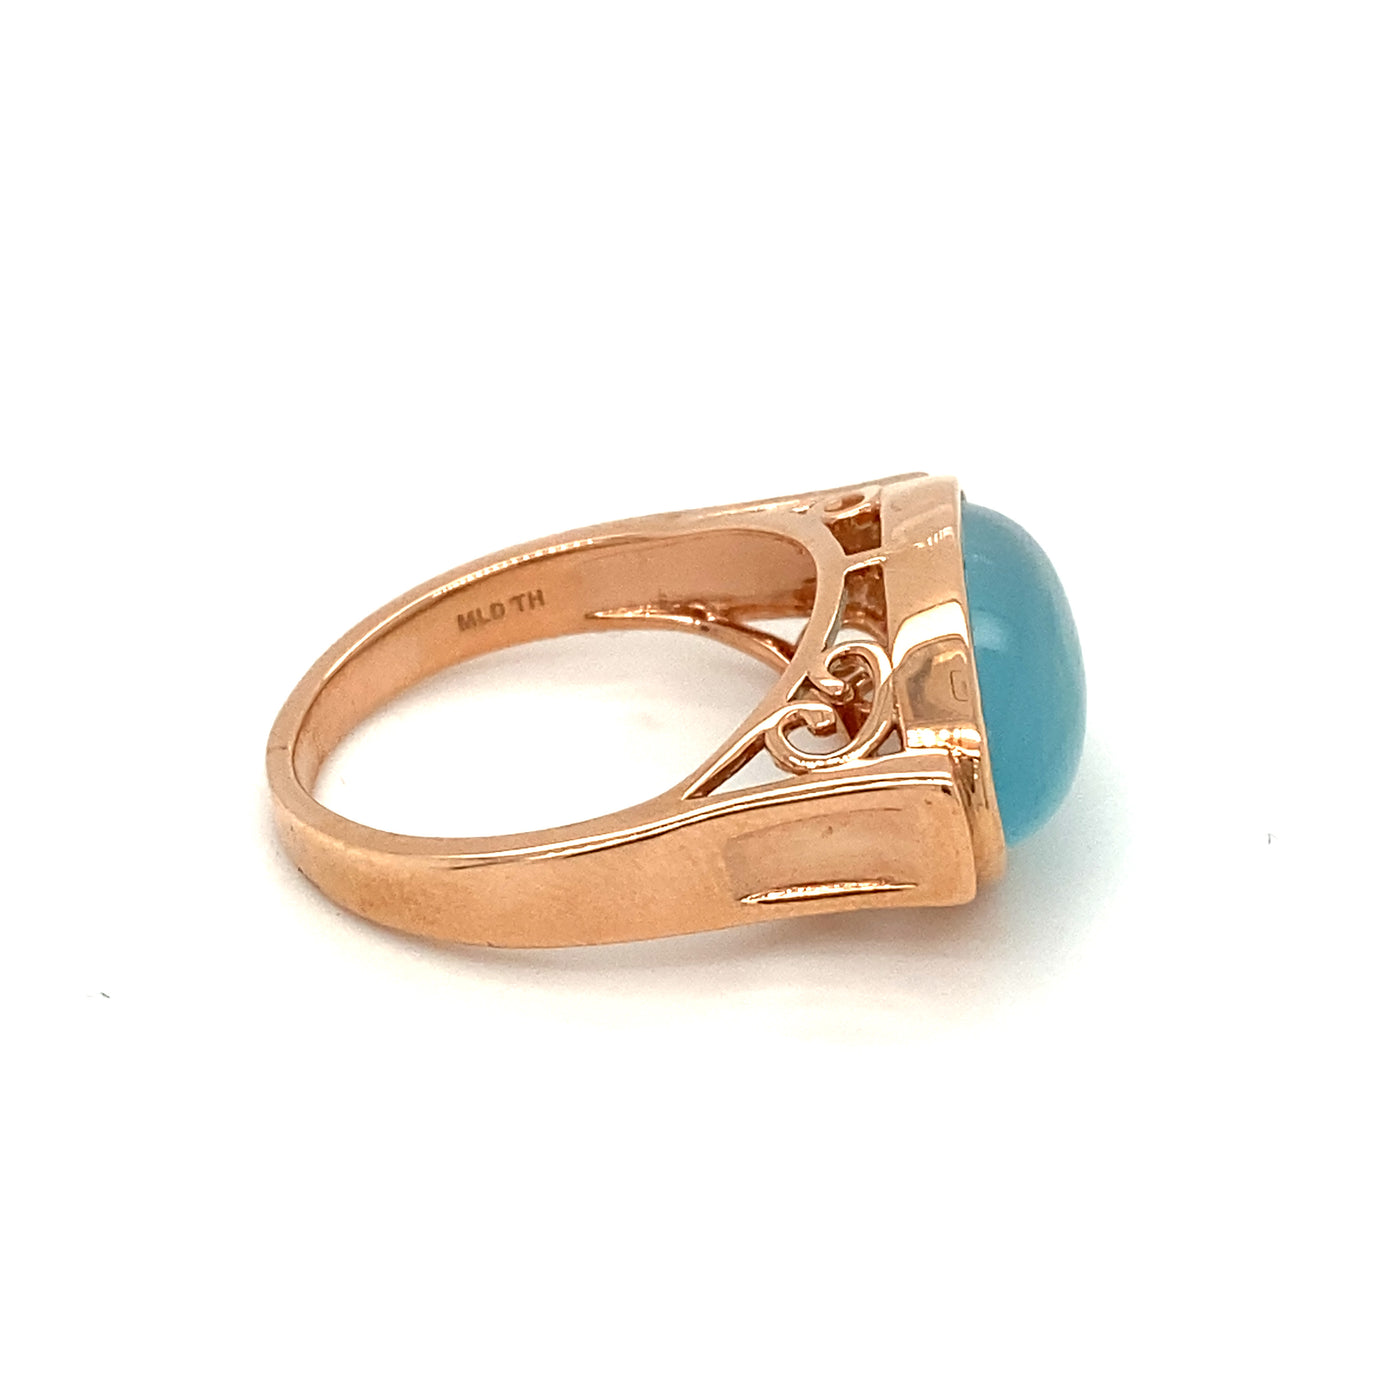 East West Oval Cabochon Ring